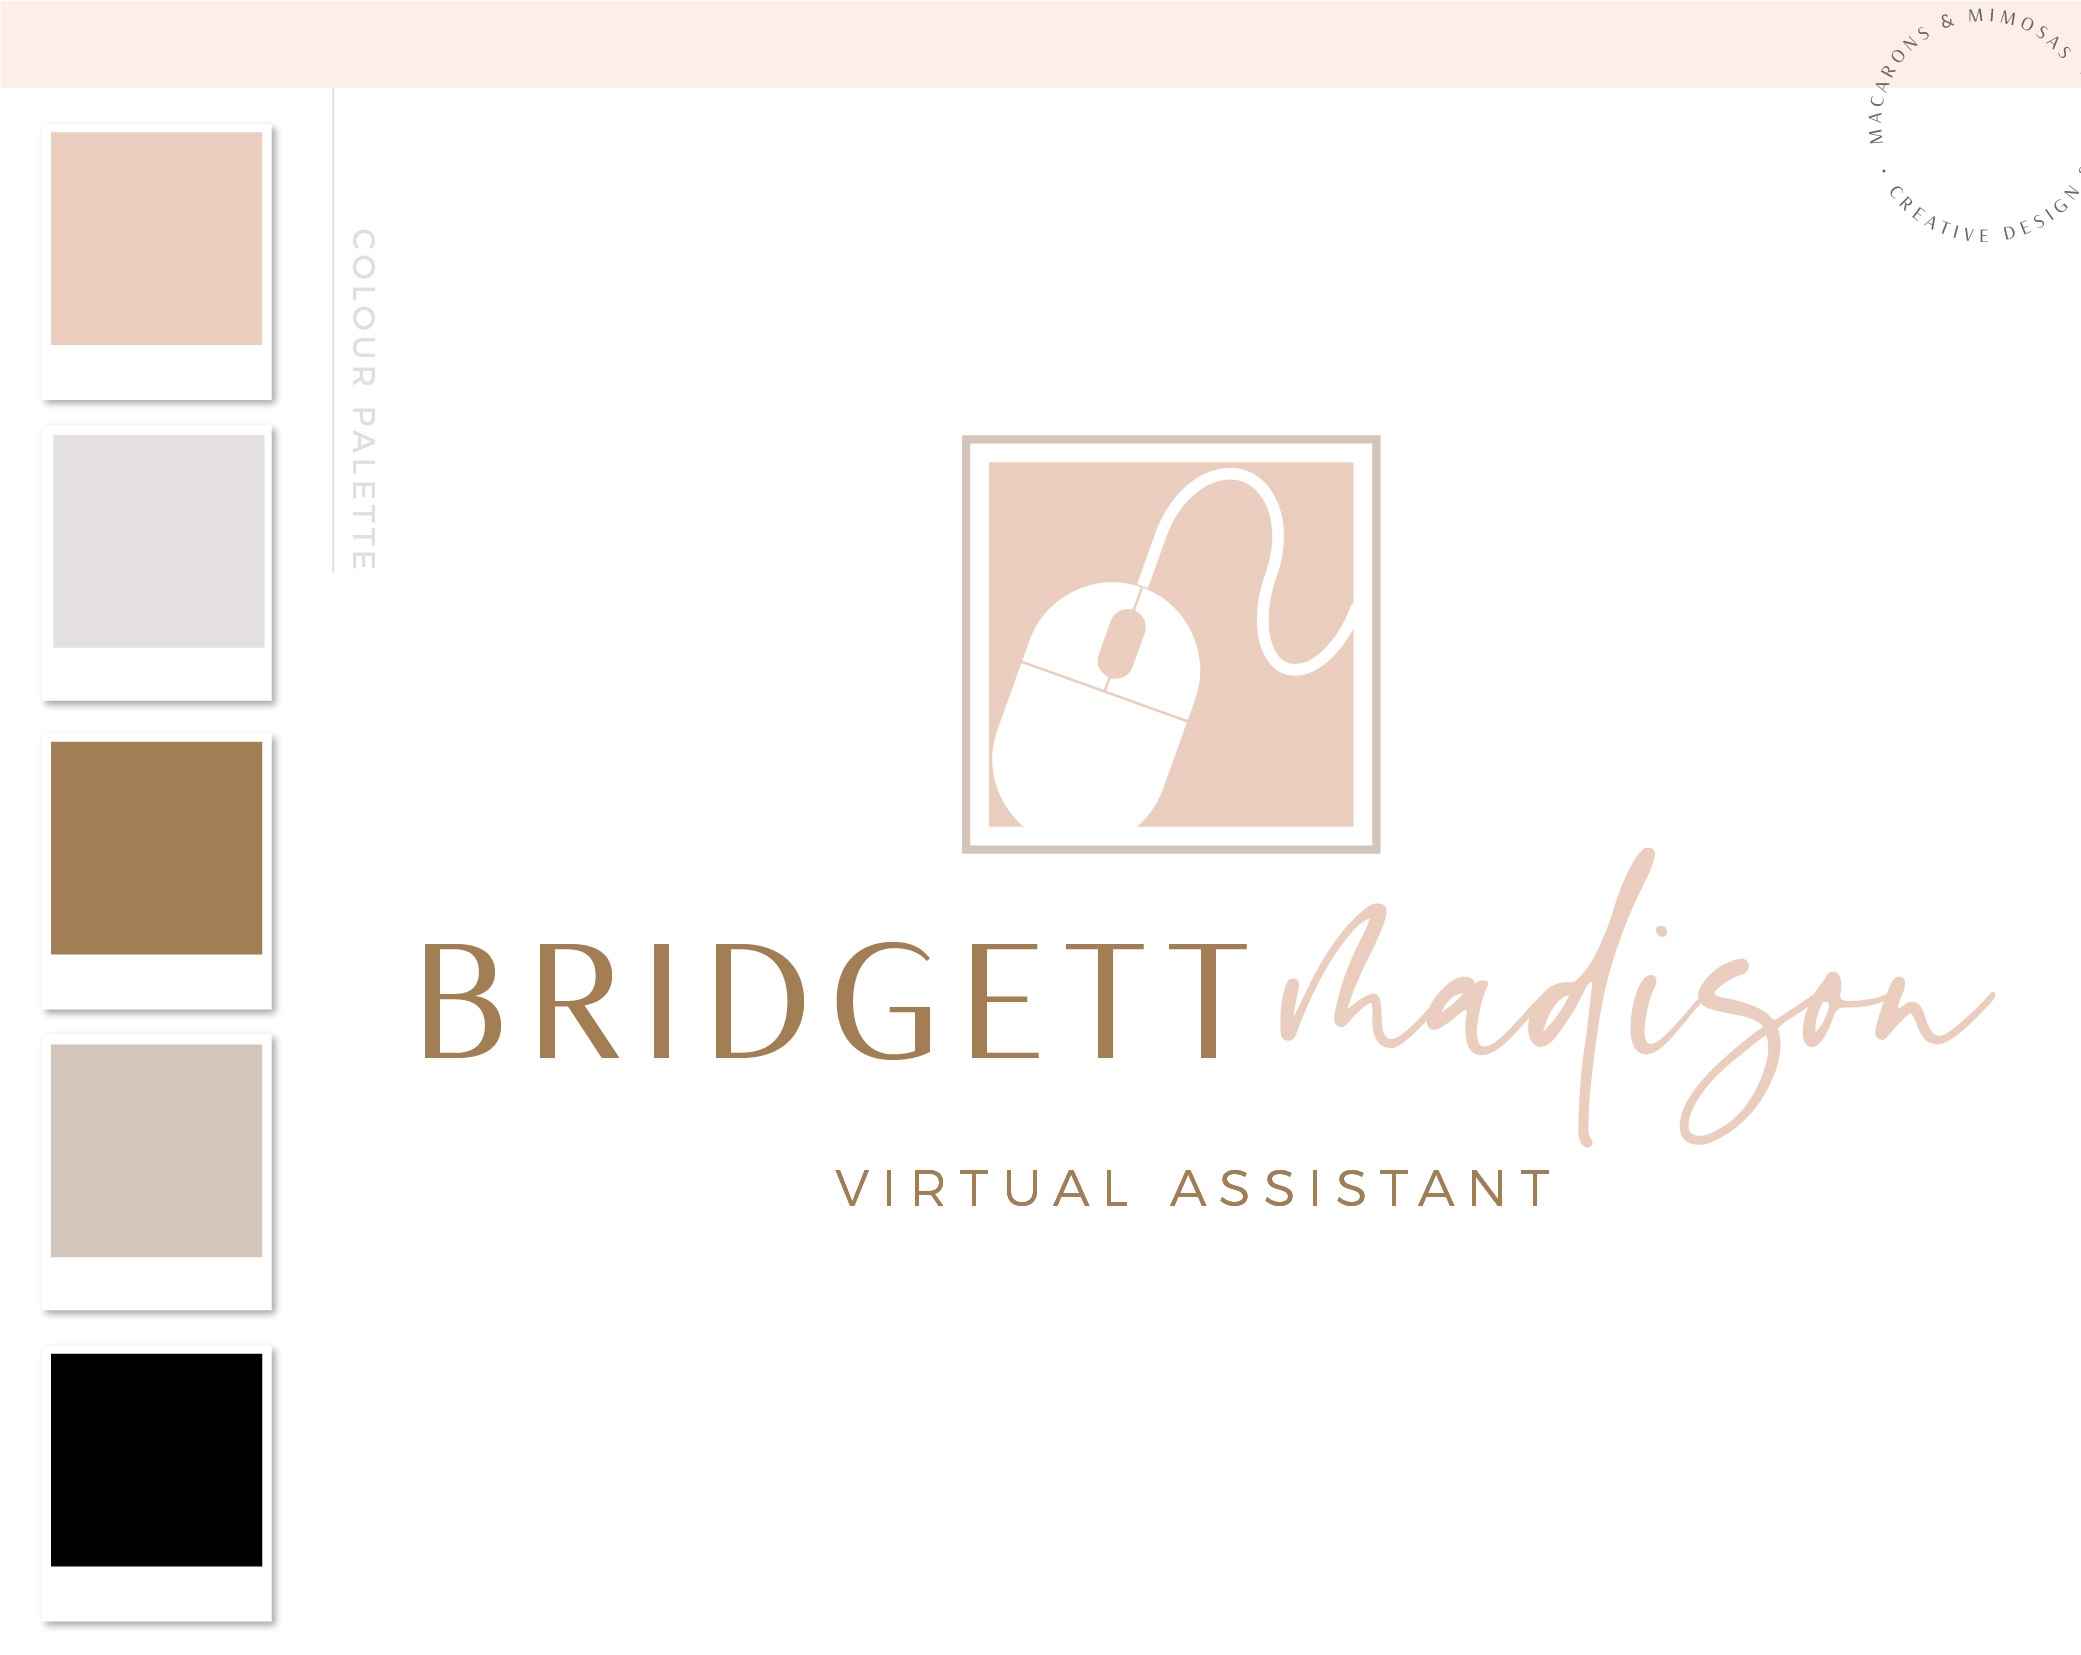 Virtual Assistant Logo Design, Accounting or Bookkeeping Logo with Trackball Mouse, Tax Prep & CPA Branding Kit, Copywriter Logo Design